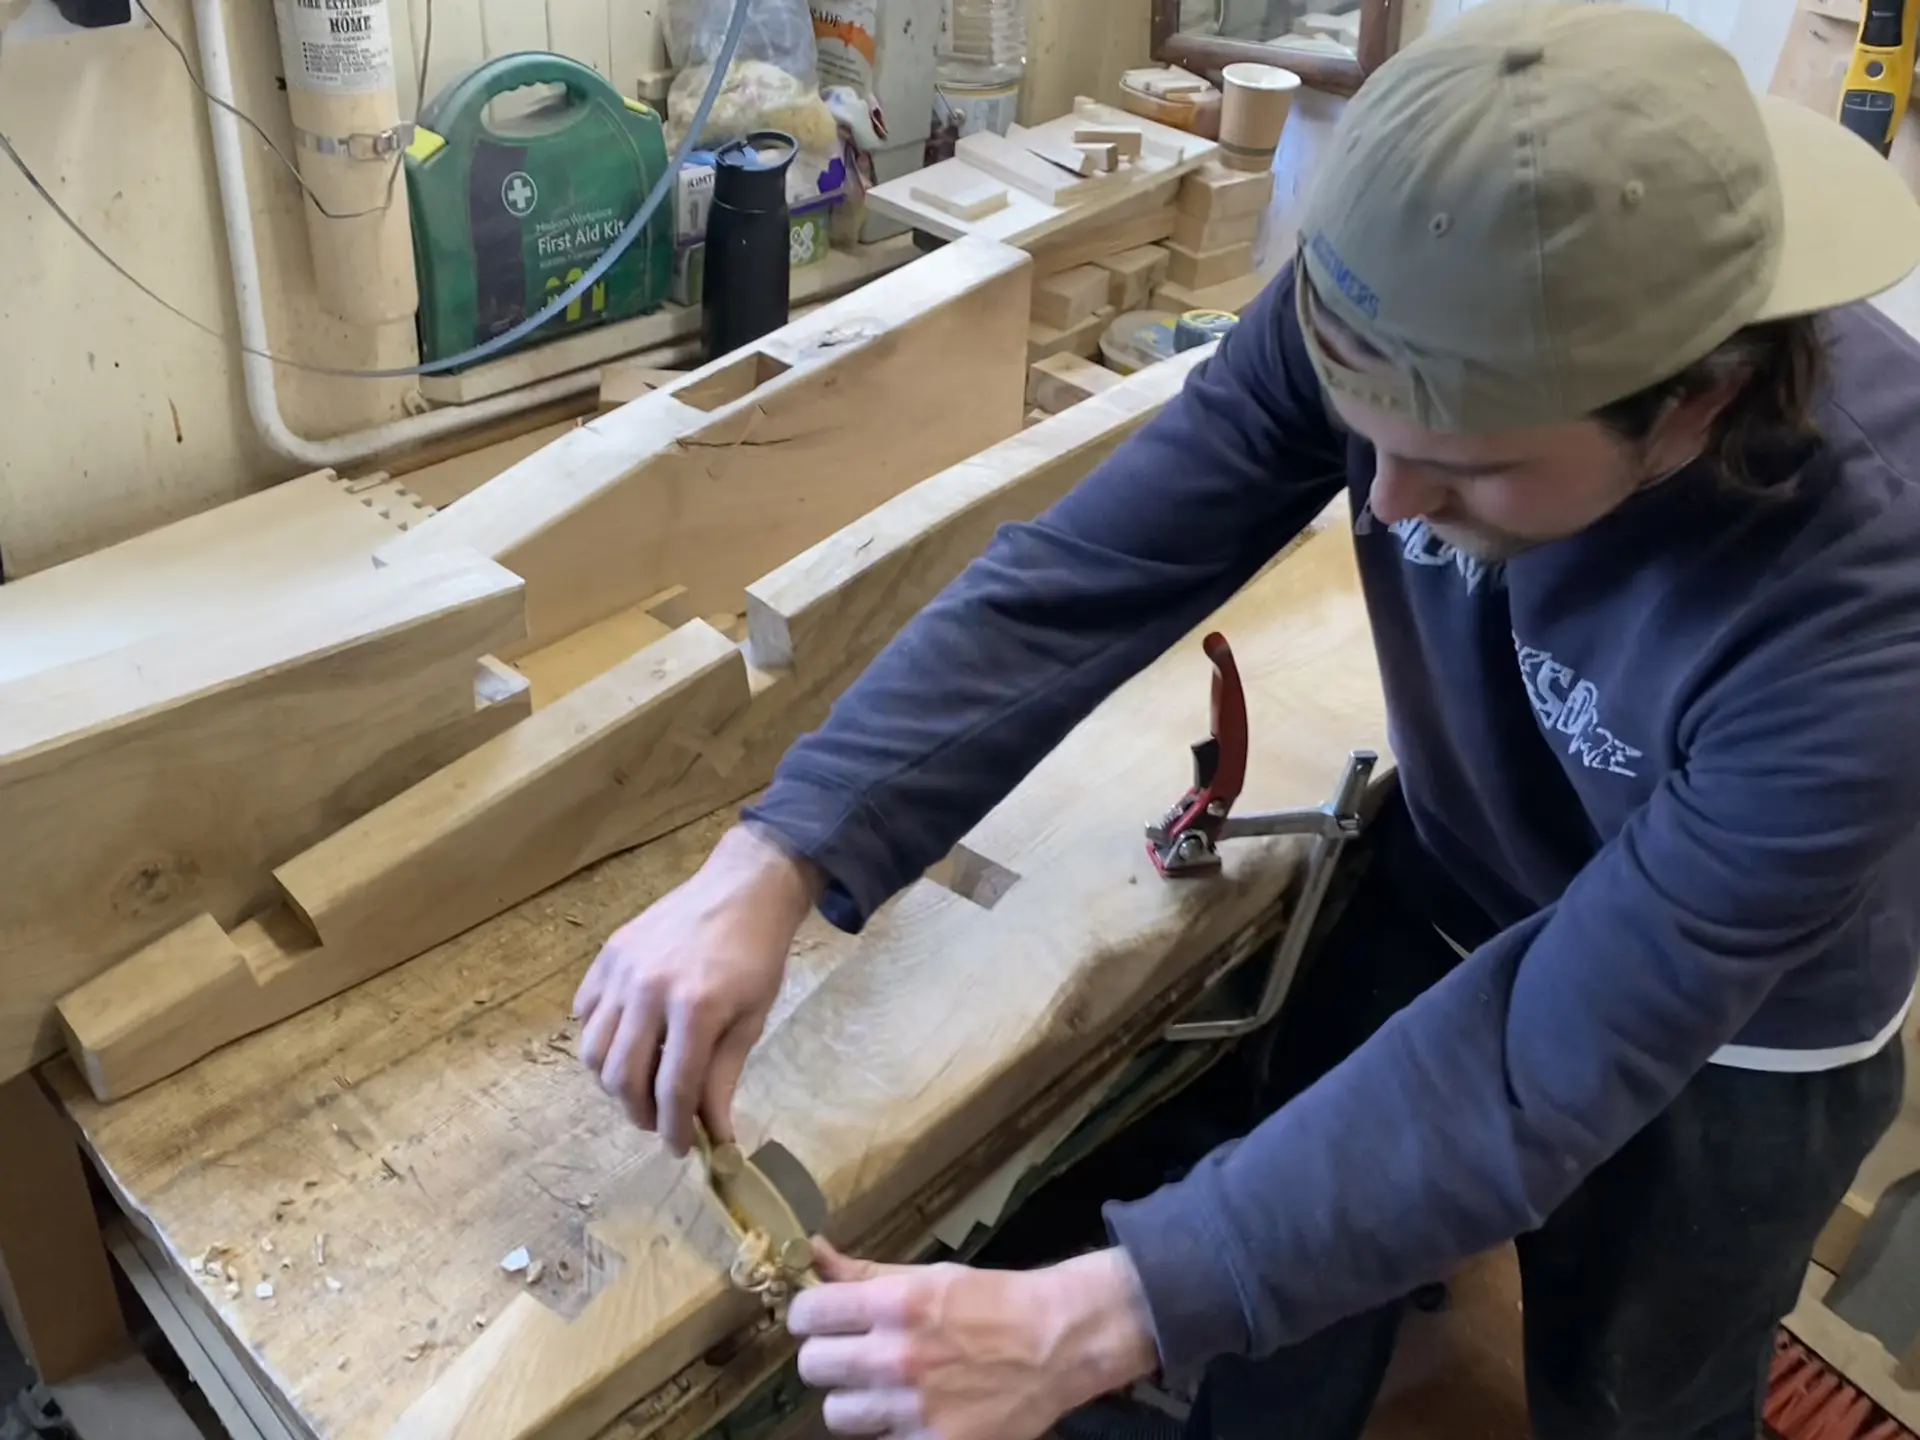 A man works with large pieces of wood inside a workshop. He wears a baseball cap back to front. He is using both of his hands outstretched, to work the wood with a tool. There are pieces of wood cut into various shapes and with sections cut out of them, large slots